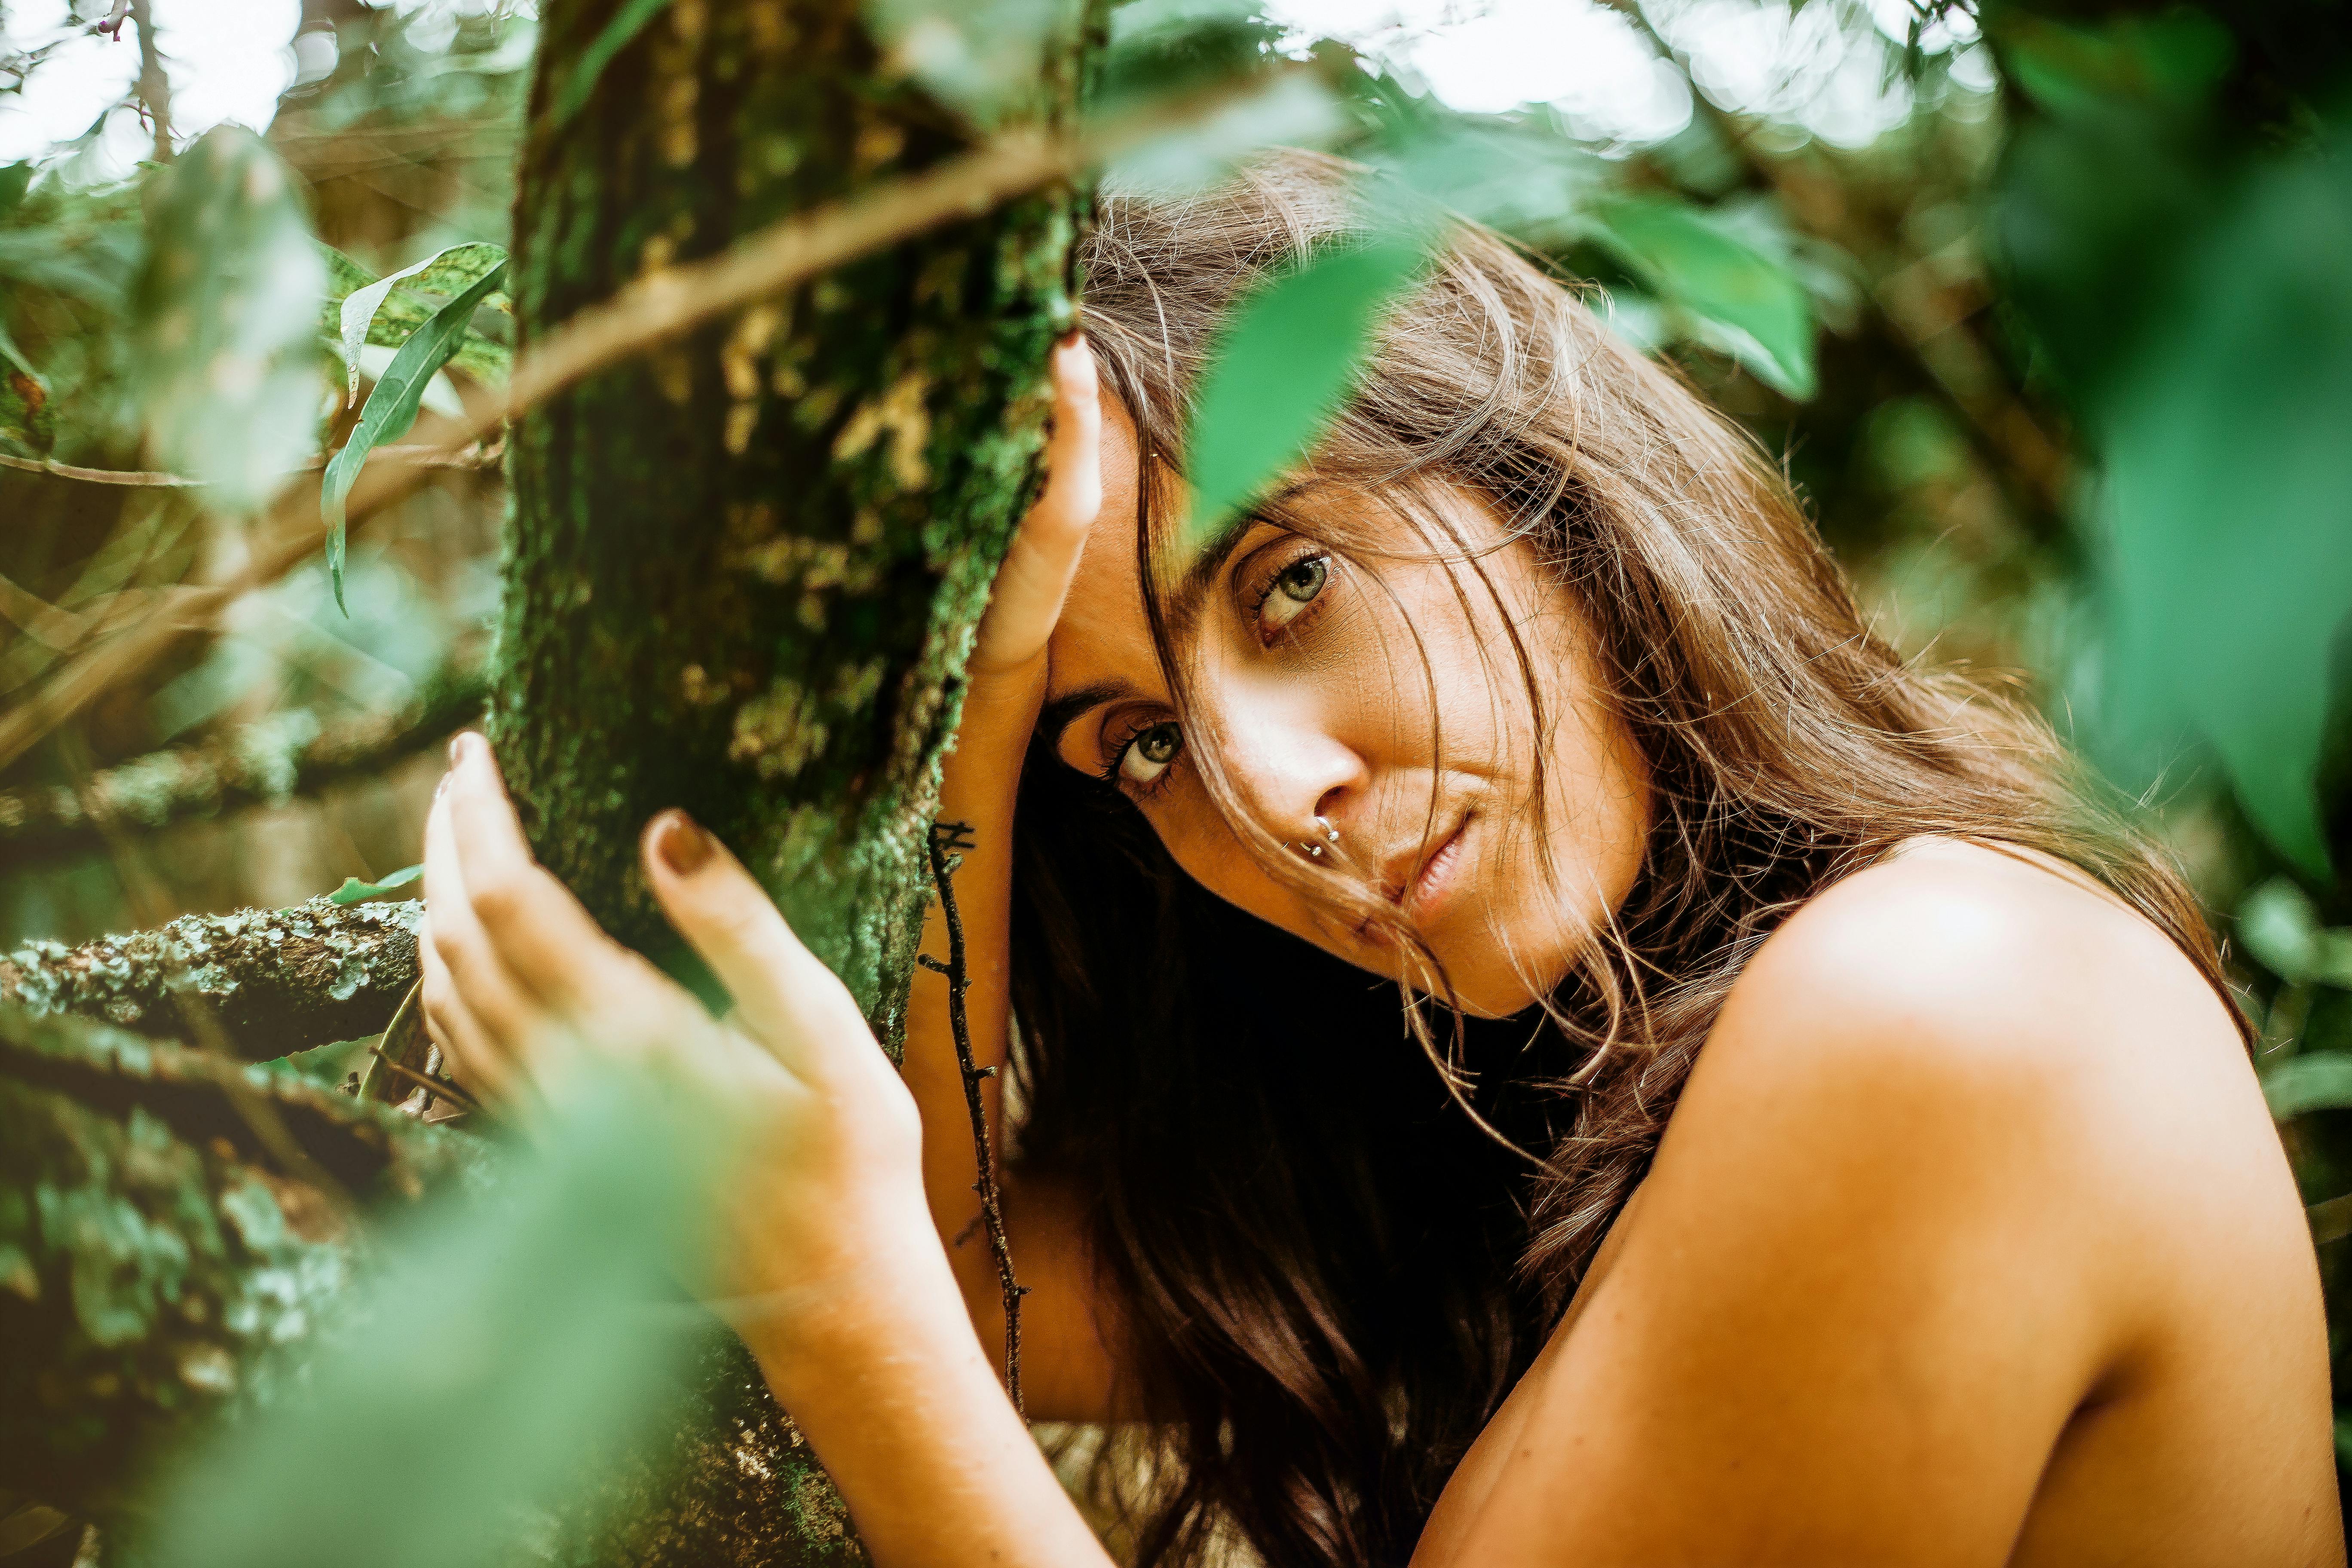 Naked Woman Holding Tree Branch · Free Stock Photo